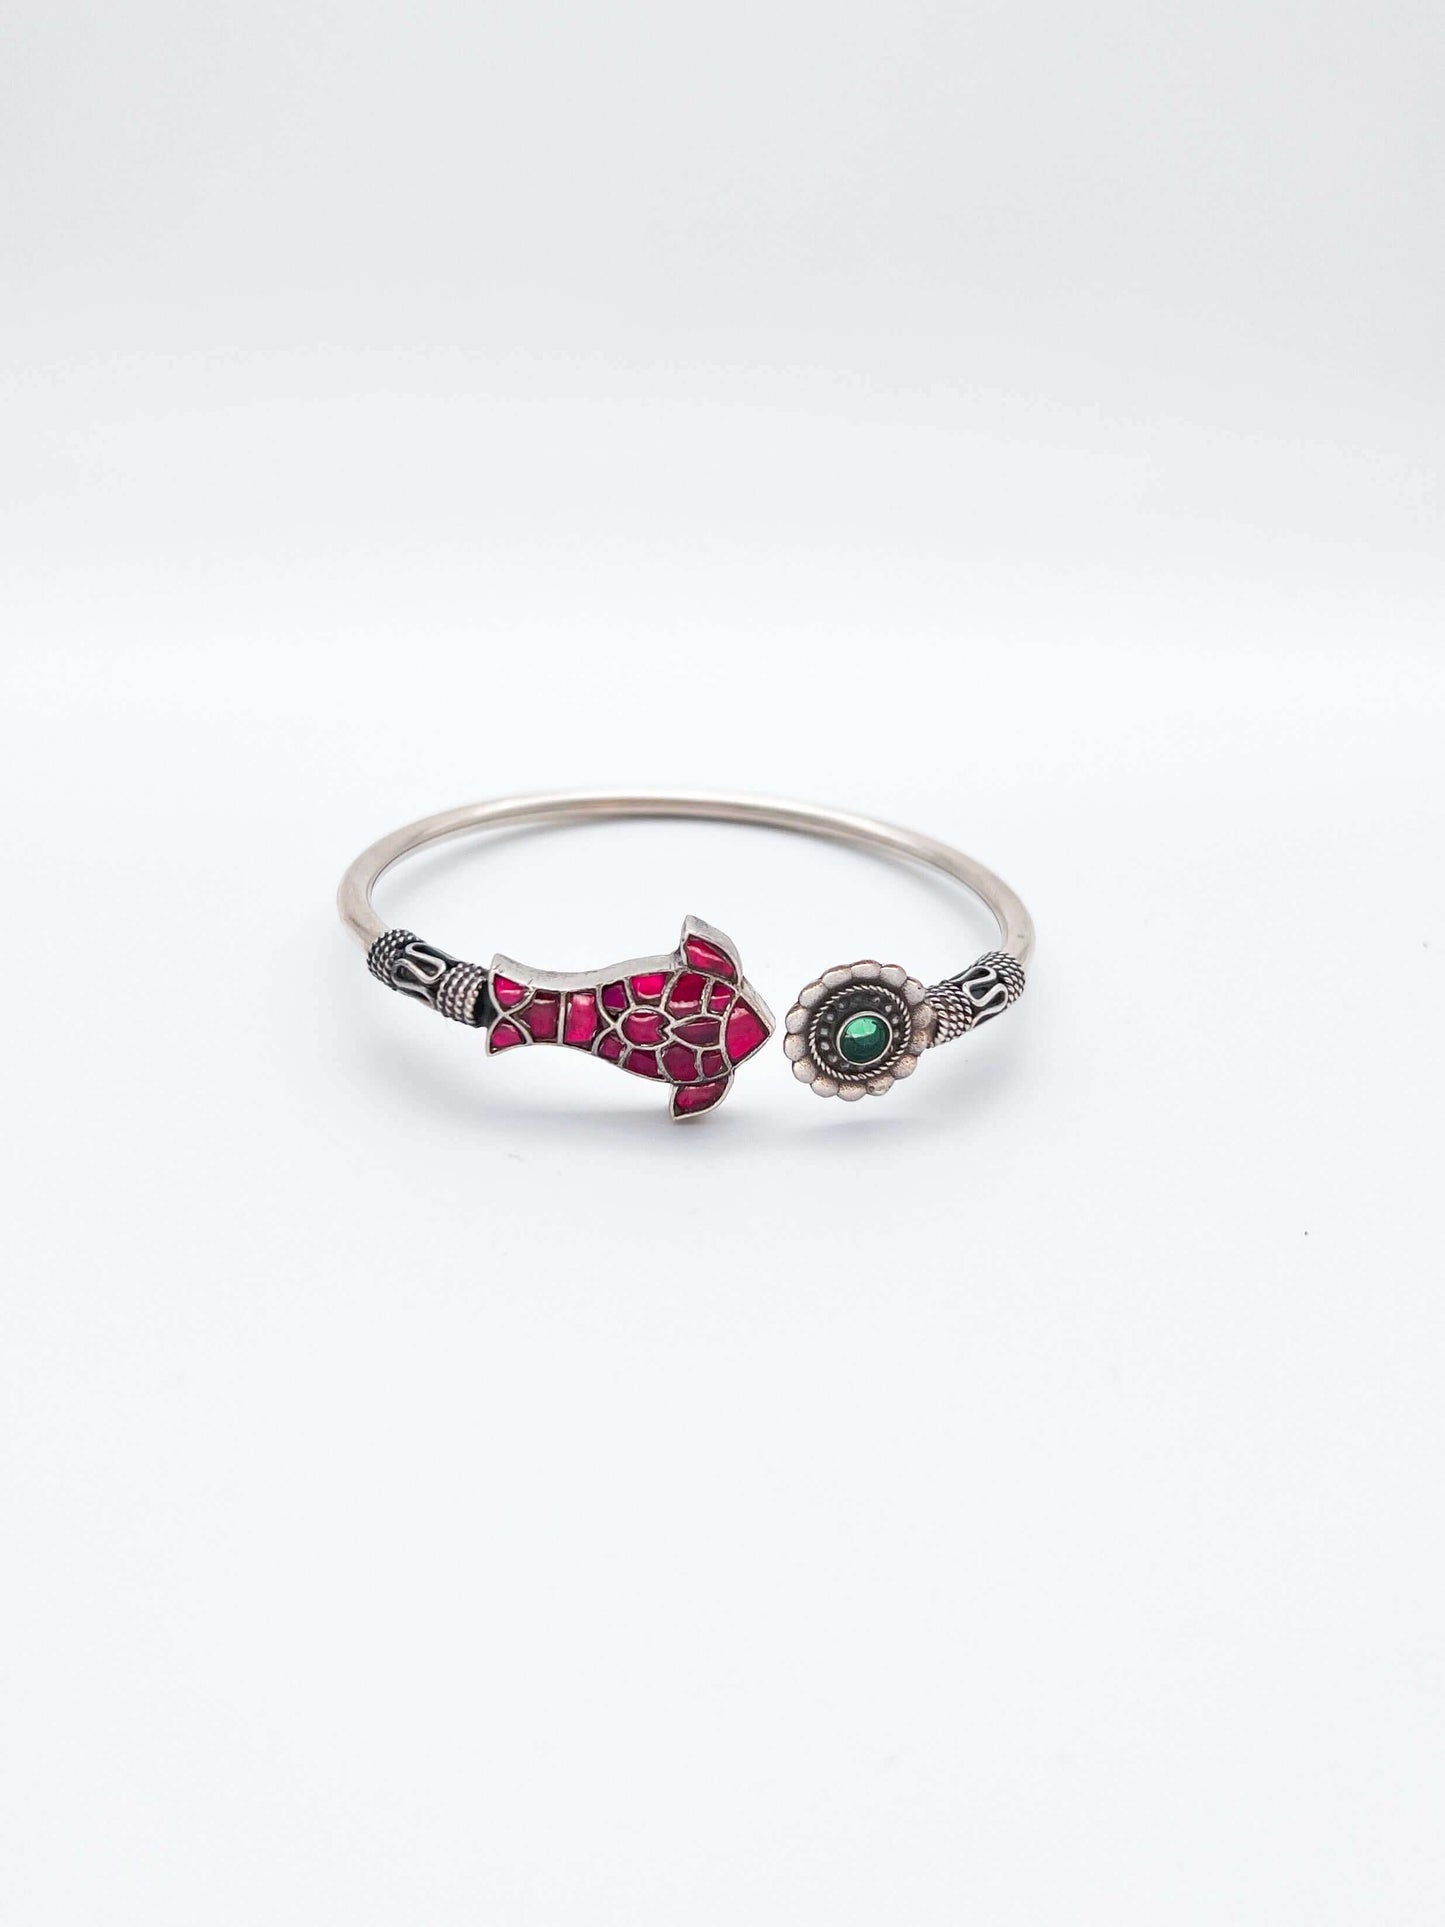 Meenakshi silver kada with ruby pink and green glass stone